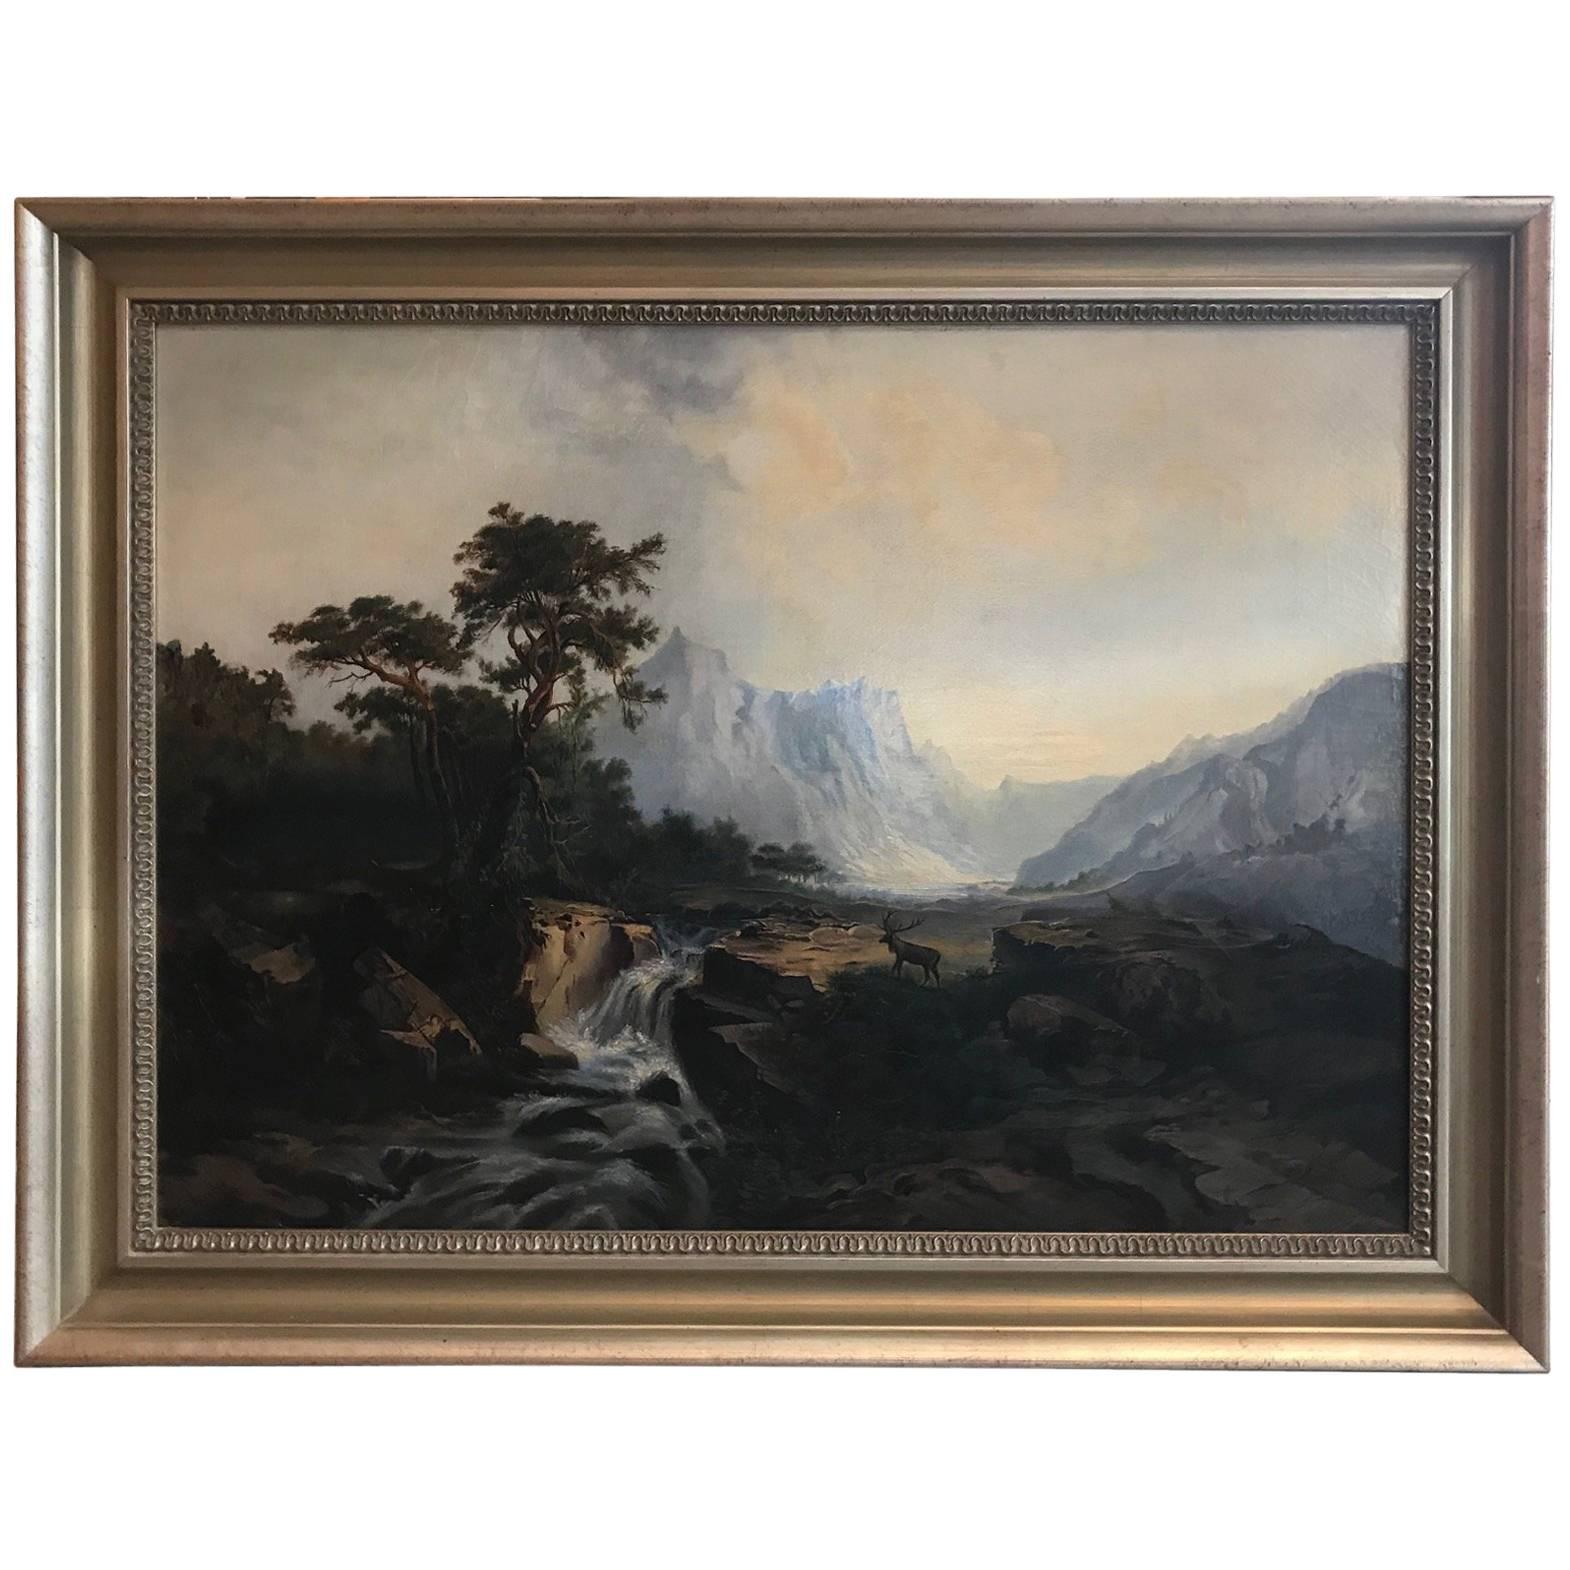 Antique 19th Cent. European Oil Painting on Canvas Signed M. L. Tunner, 1872